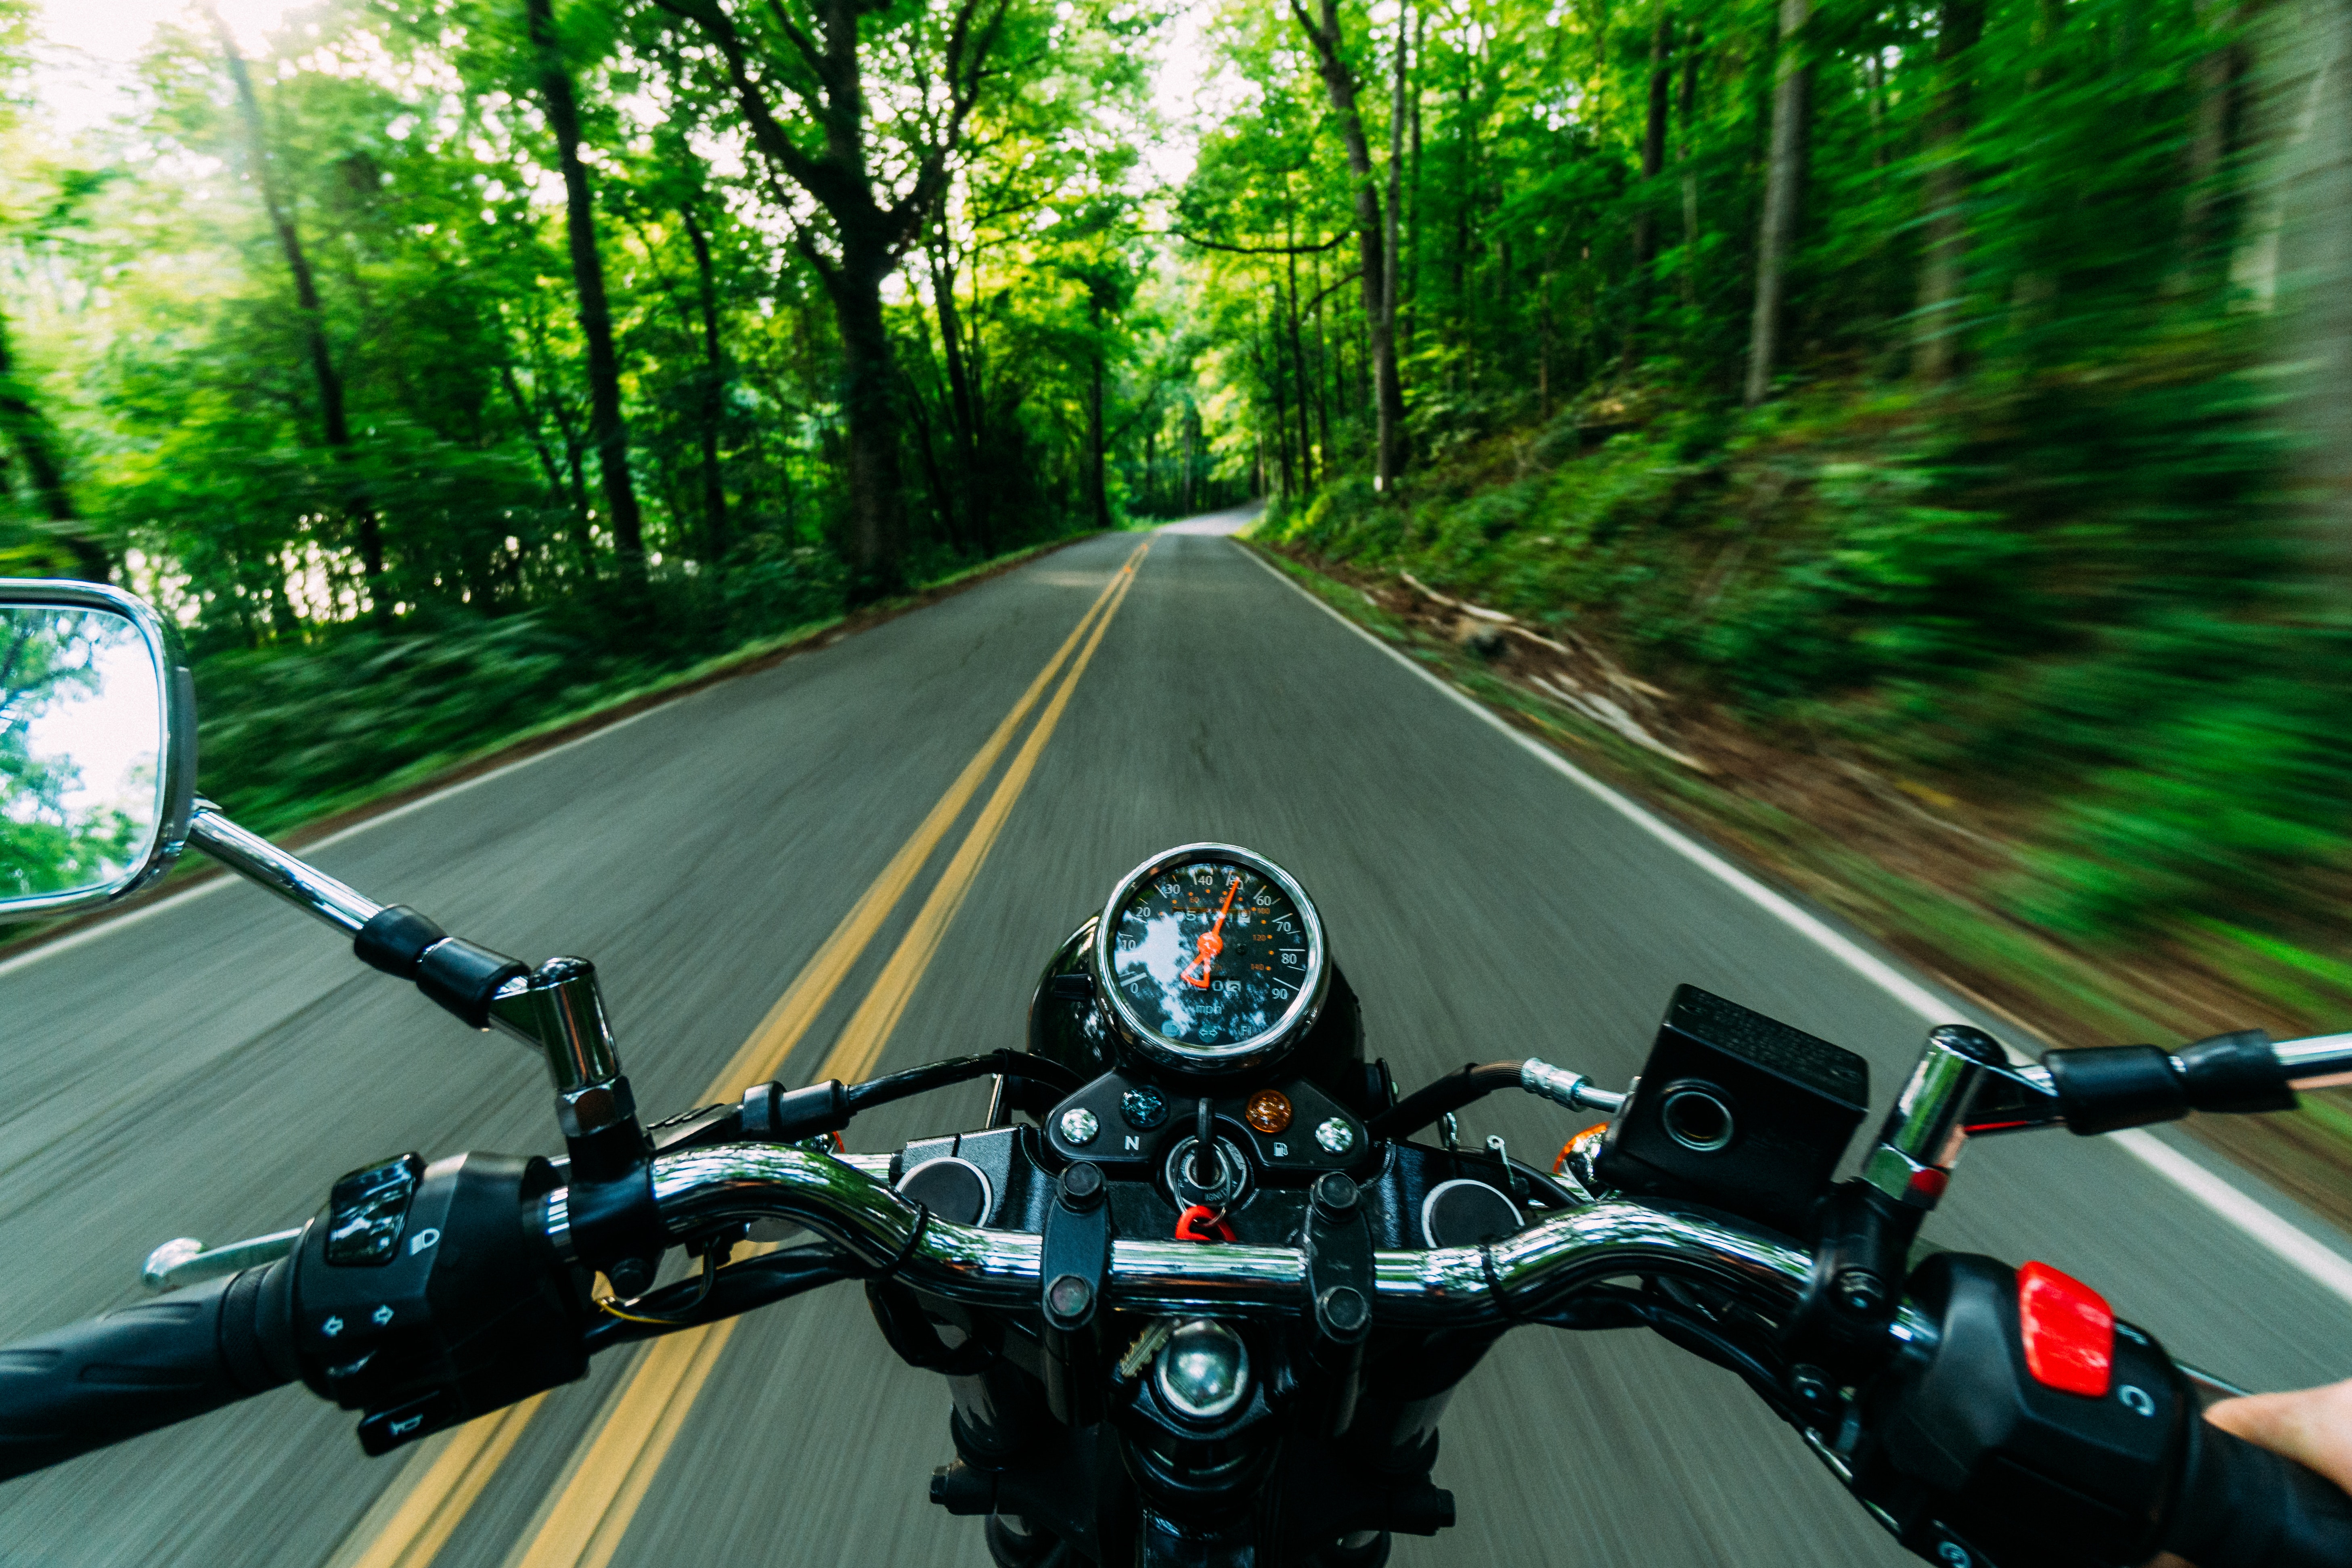 Rider's perspective of a motorcycle handlebar with a speedometer and a road ahead, symbolizing the experience of riding a motorcycle and the potential need for a motorcycle accident lawyer.